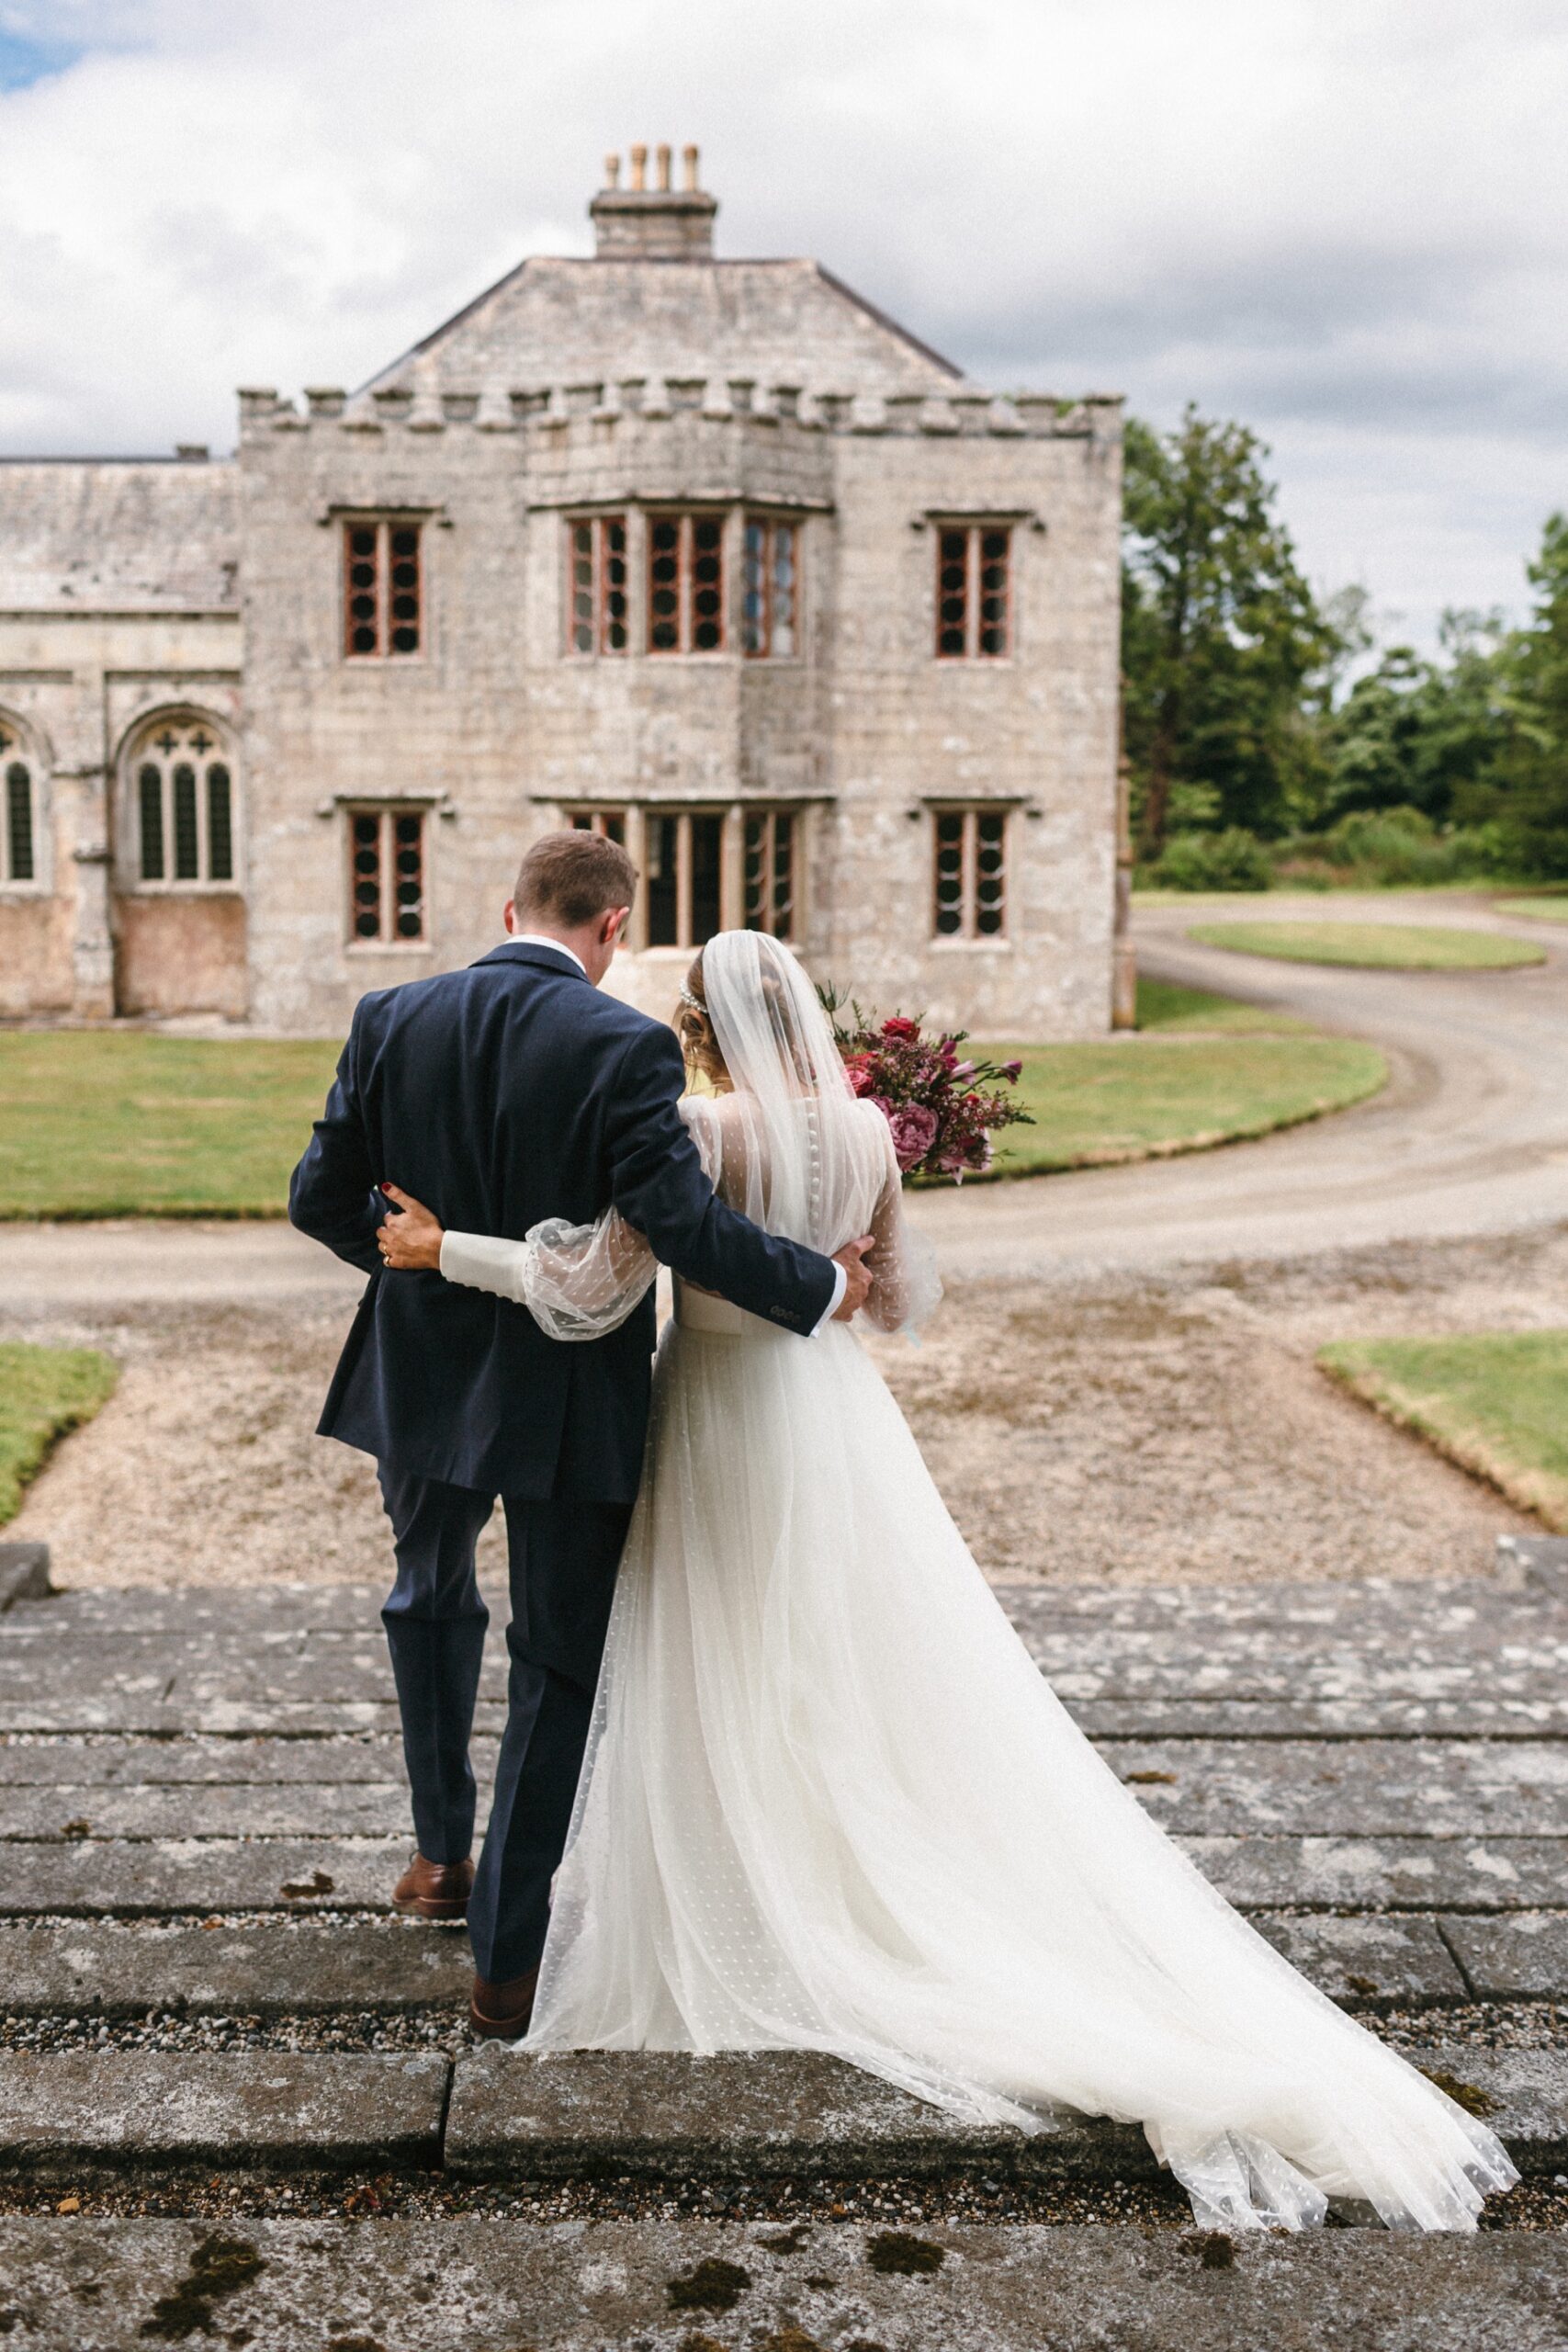 Relaxed and creative portraits of the happy couple captured by Wedding photographer Devon & Cornwall - Freckle  Photography 